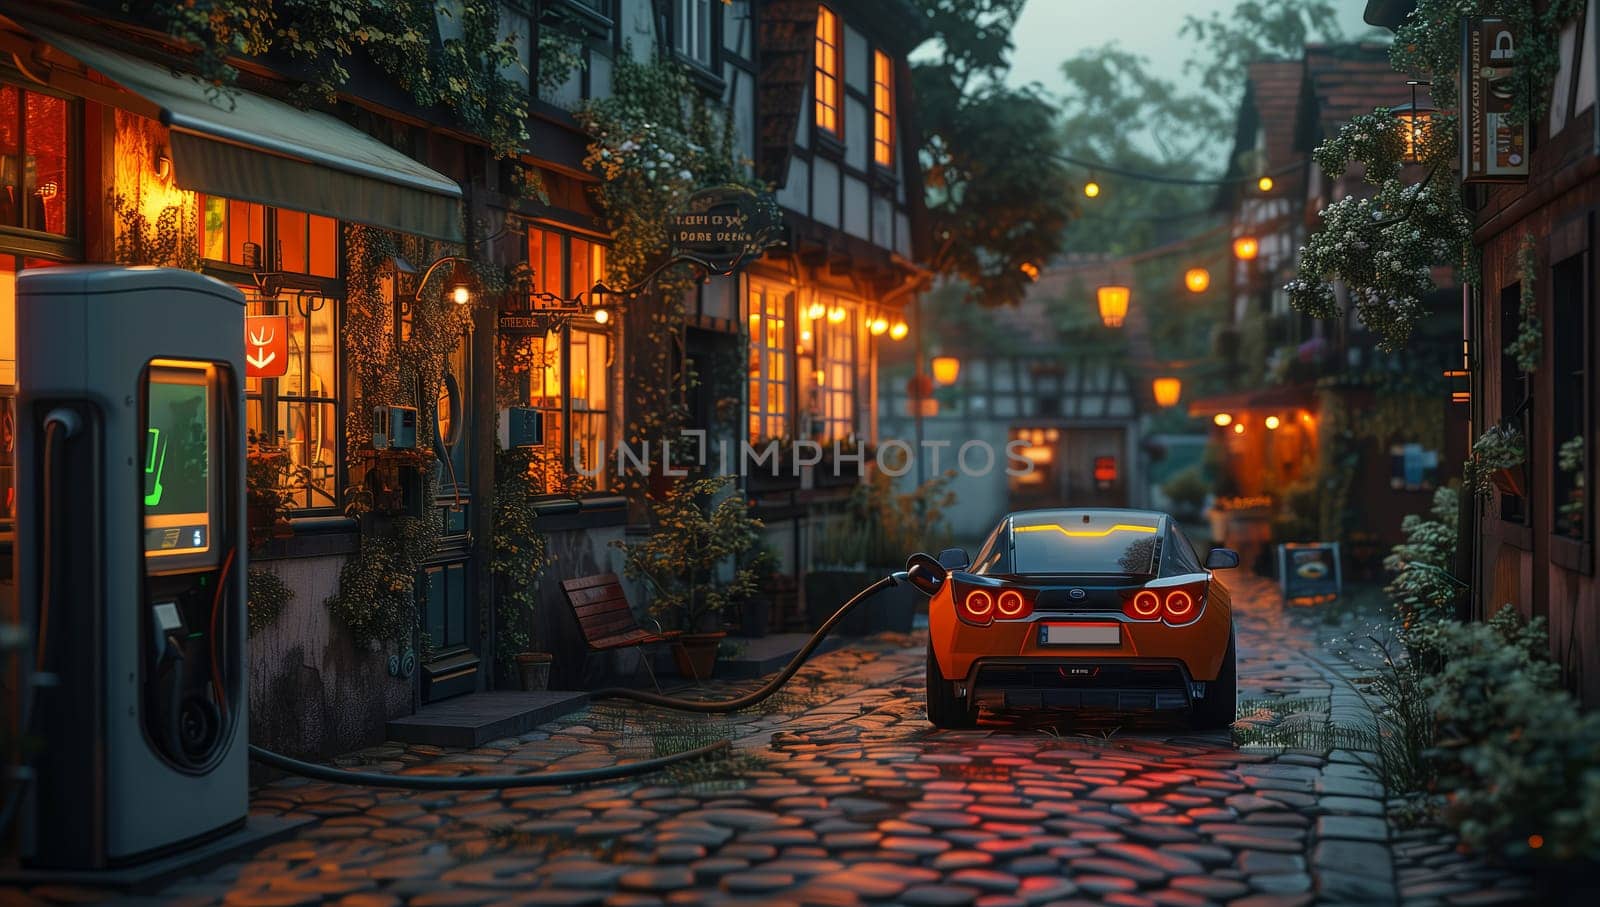 A vehicle is getting charged at a charging station on a cobblestone street in the city, with automotive lighting illuminating the scene